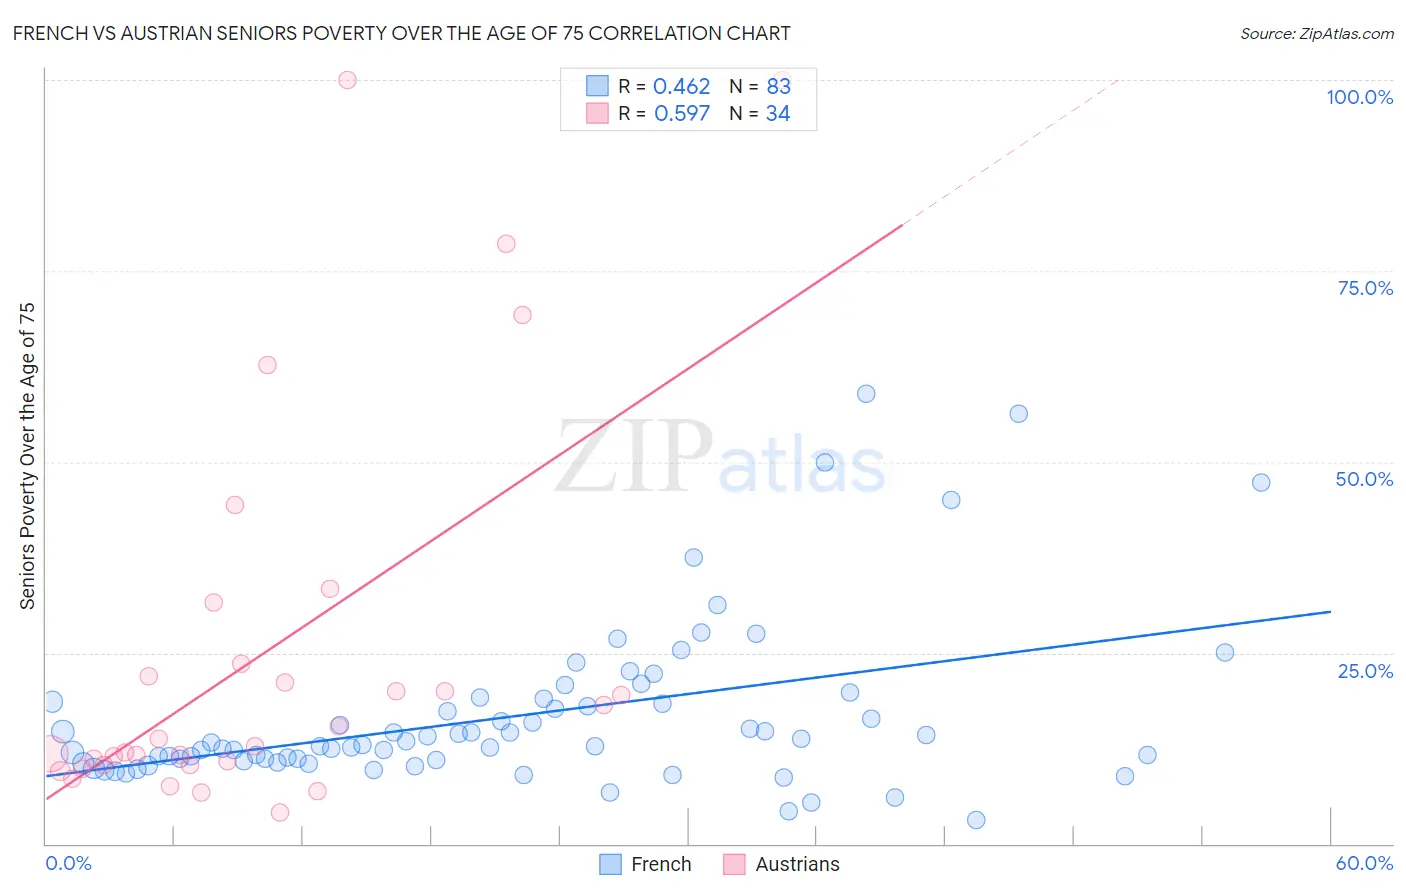 French vs Austrian Seniors Poverty Over the Age of 75